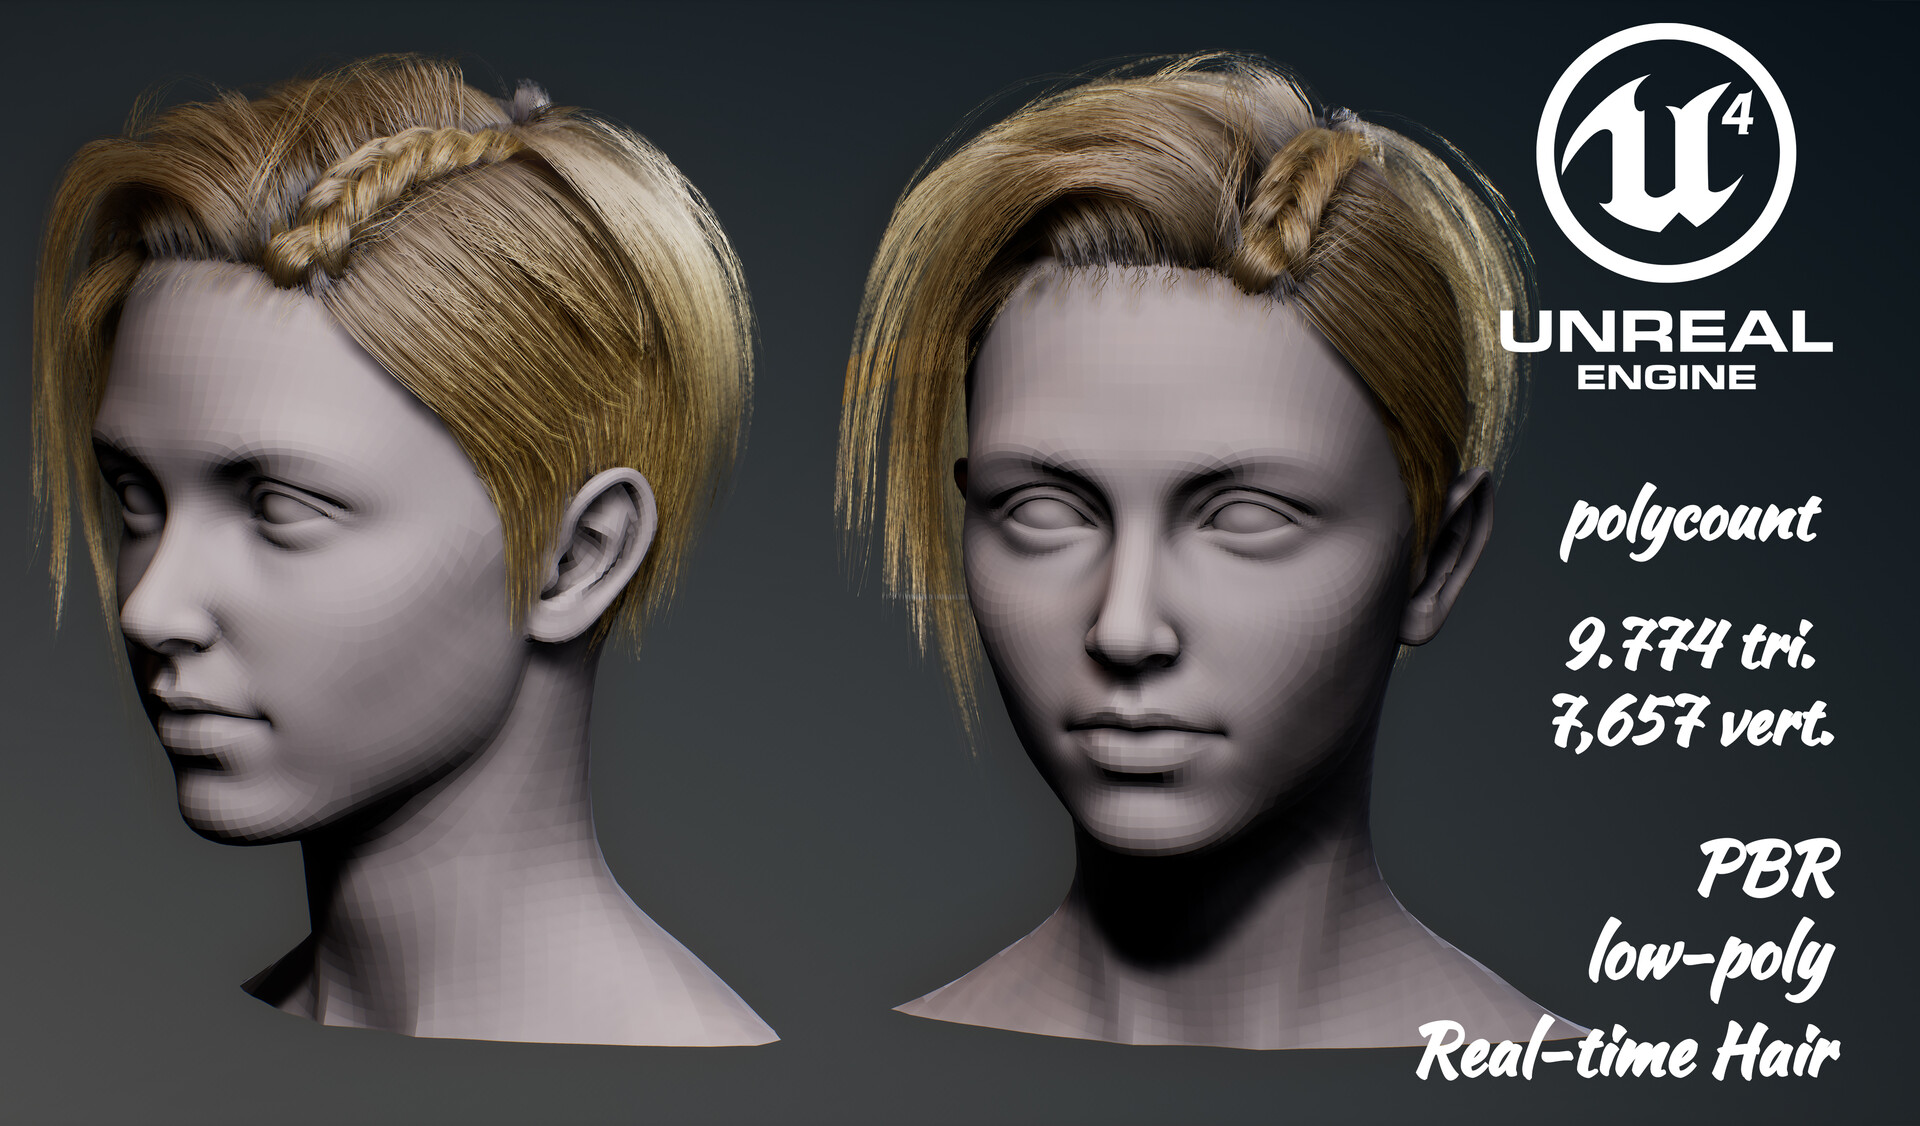 ArtStation - Game Female Hair Style Woman 3 Low-poly Low-poly 3D model